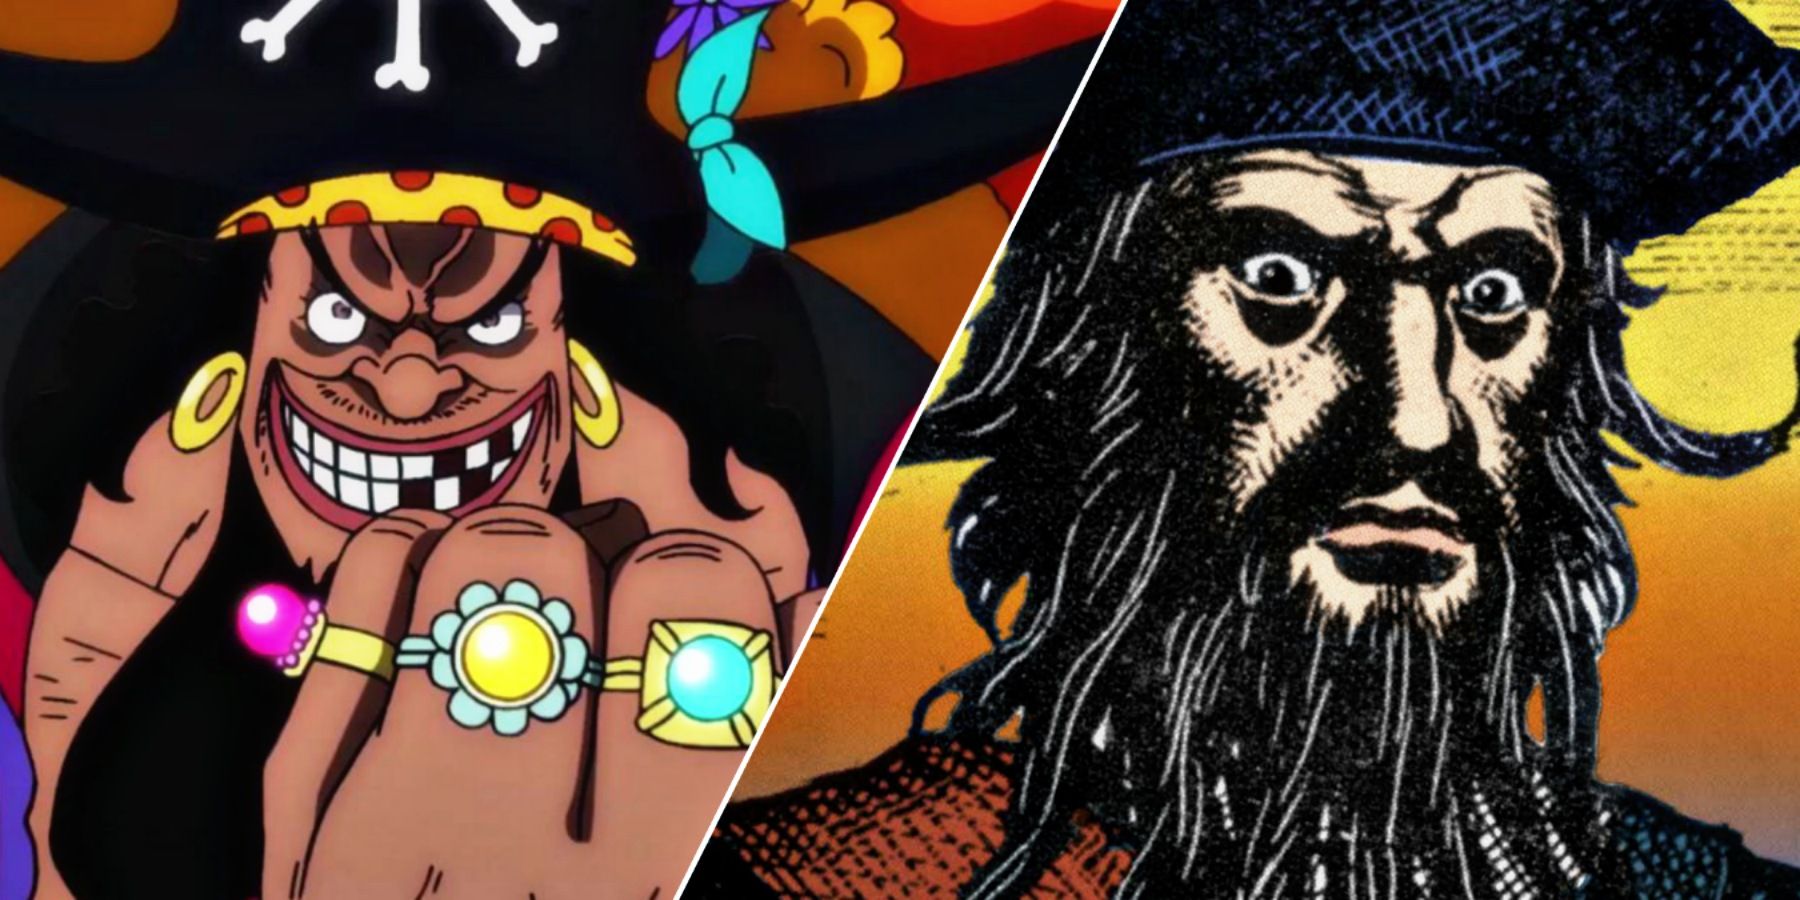 10 Coolest One Piece Character Designs And Their Real-World Inspirations